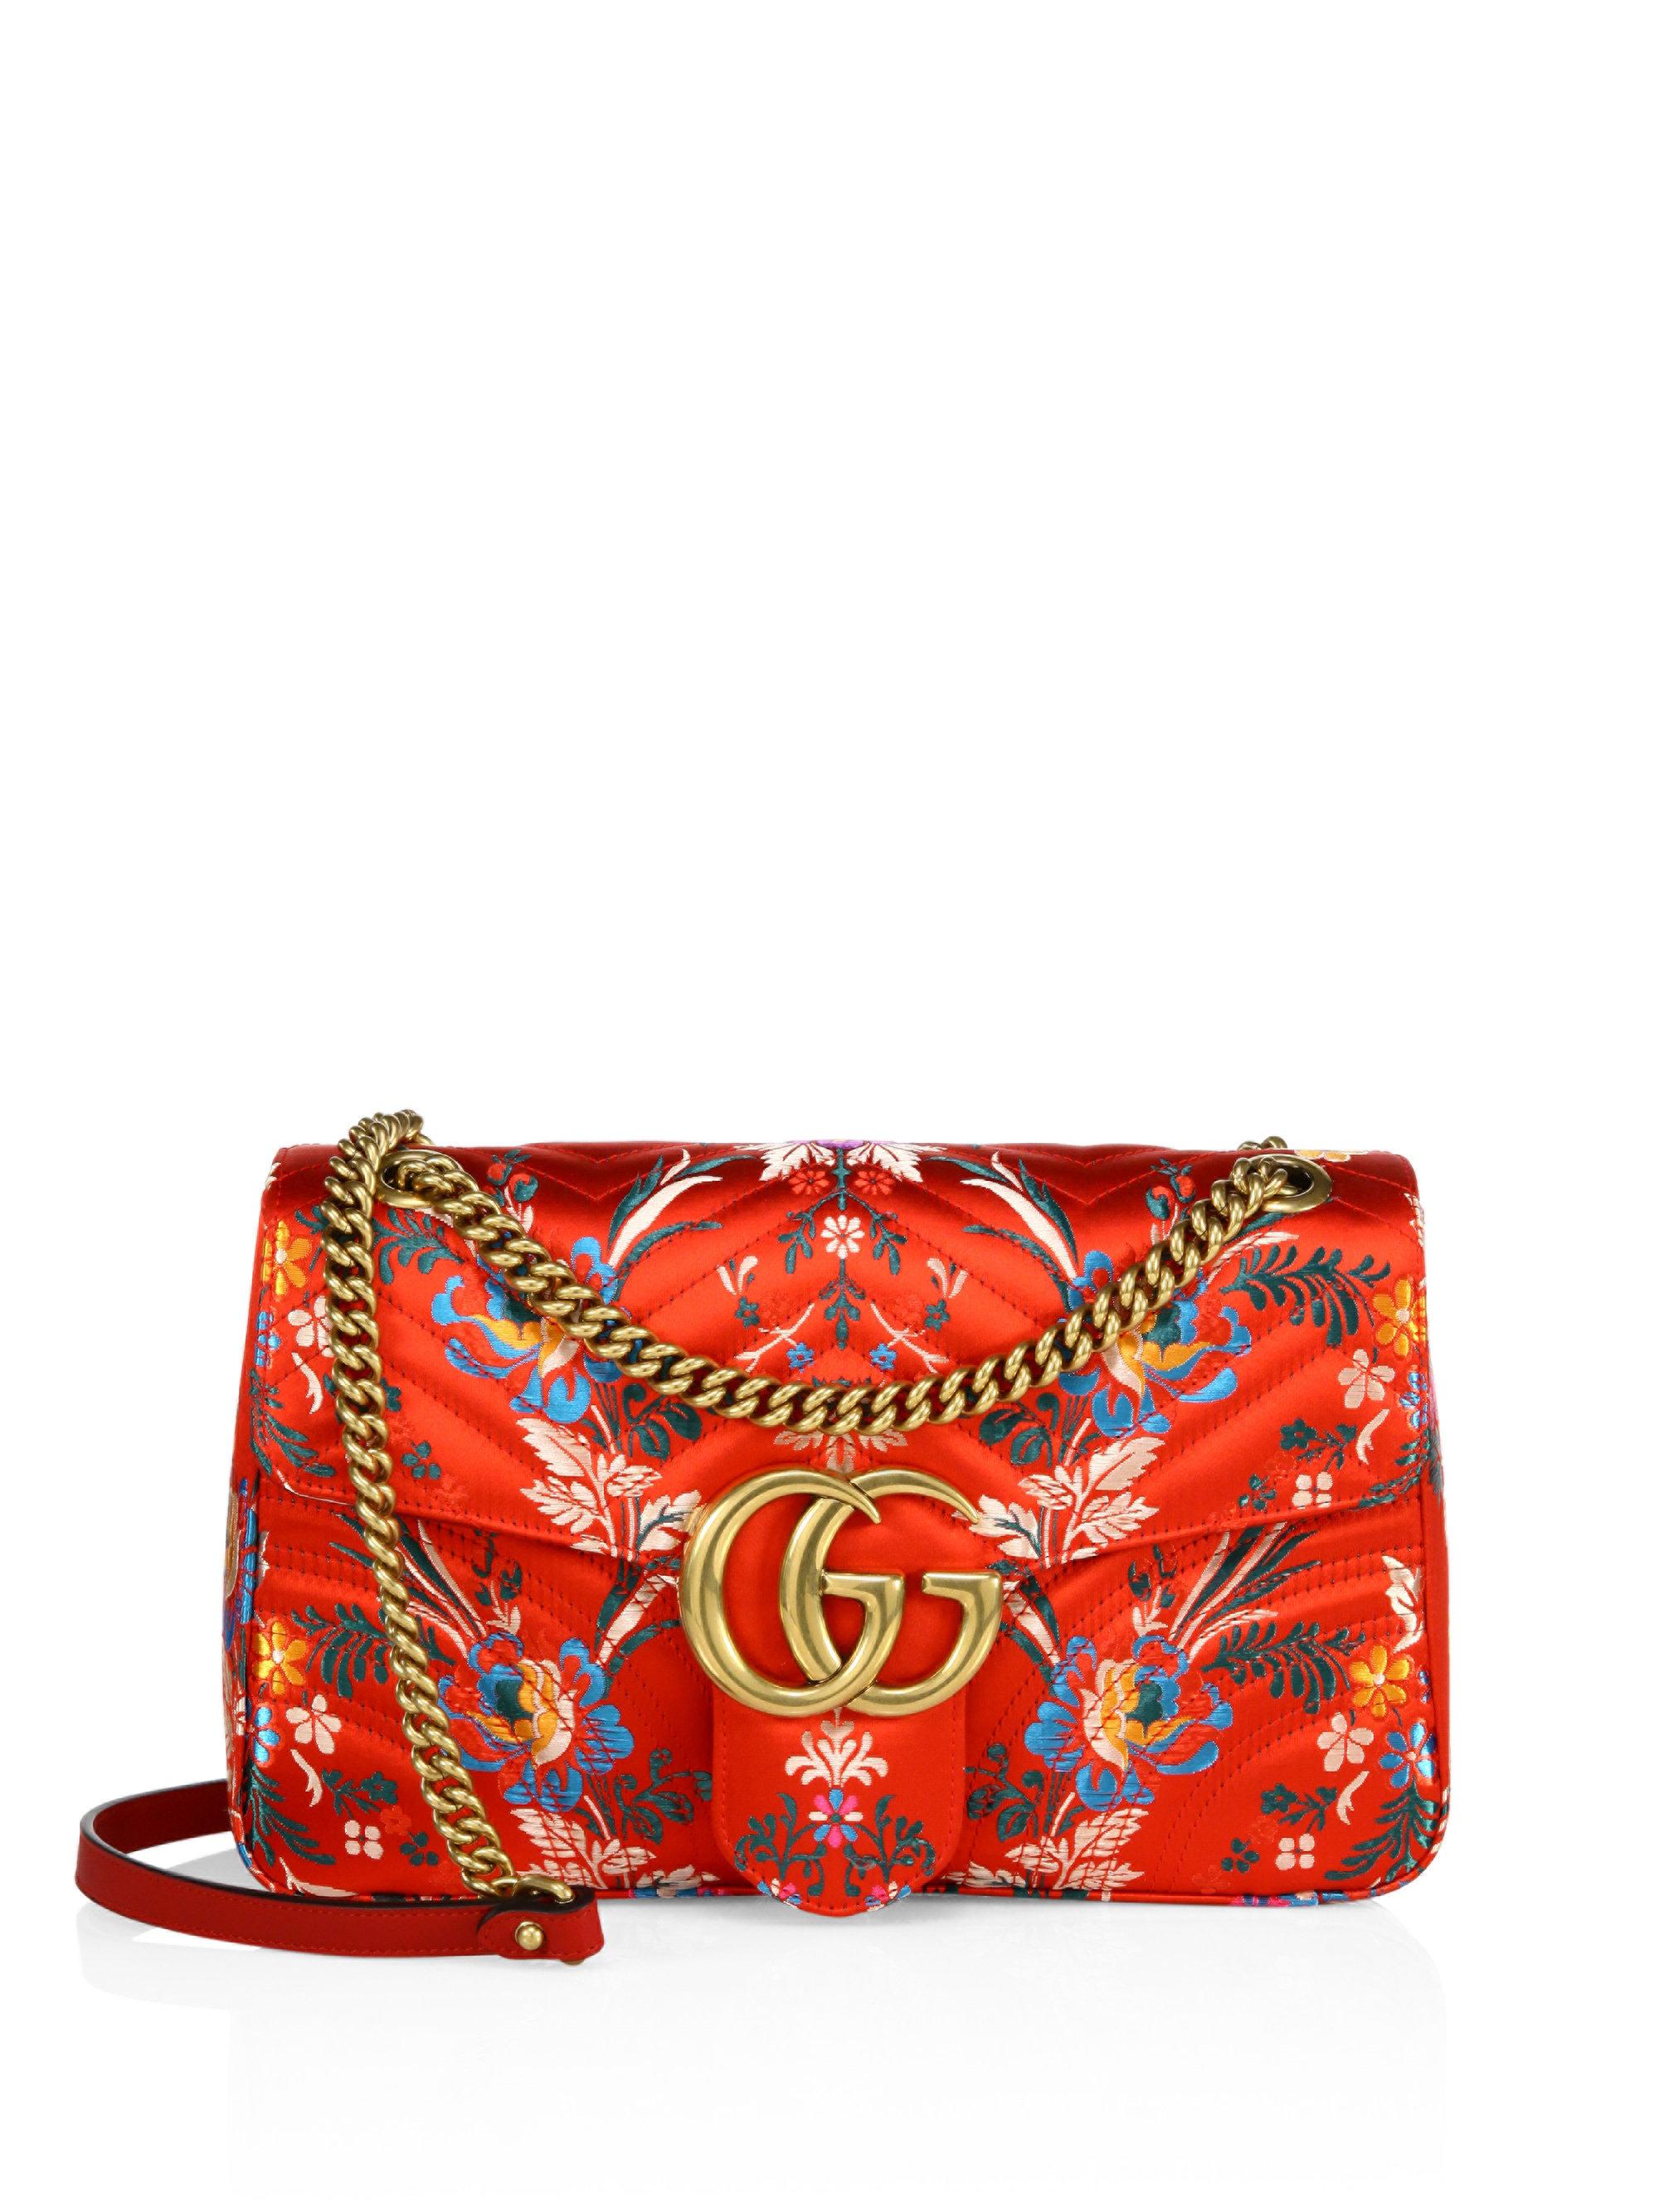 Gucci Suede Small Gg Marmont Matelasse Floral Jacquard Chain 